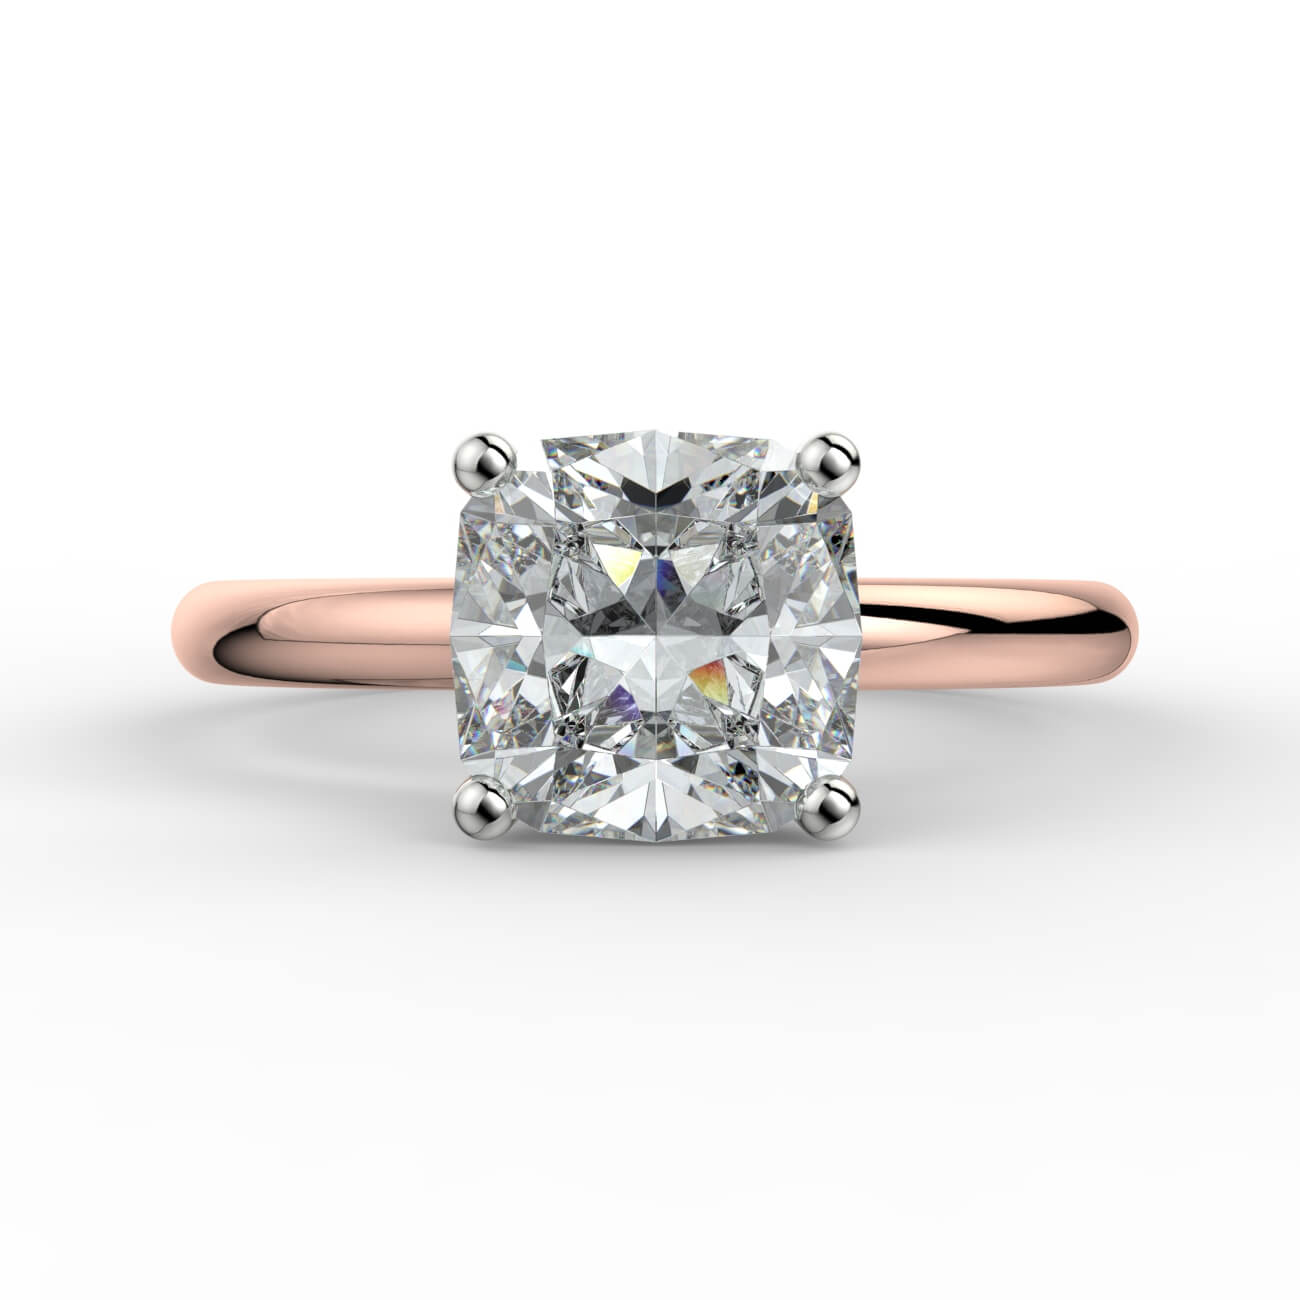 Solitaire cushion cut diamond engagement ring in white and rose gold – Australian Diamond Network